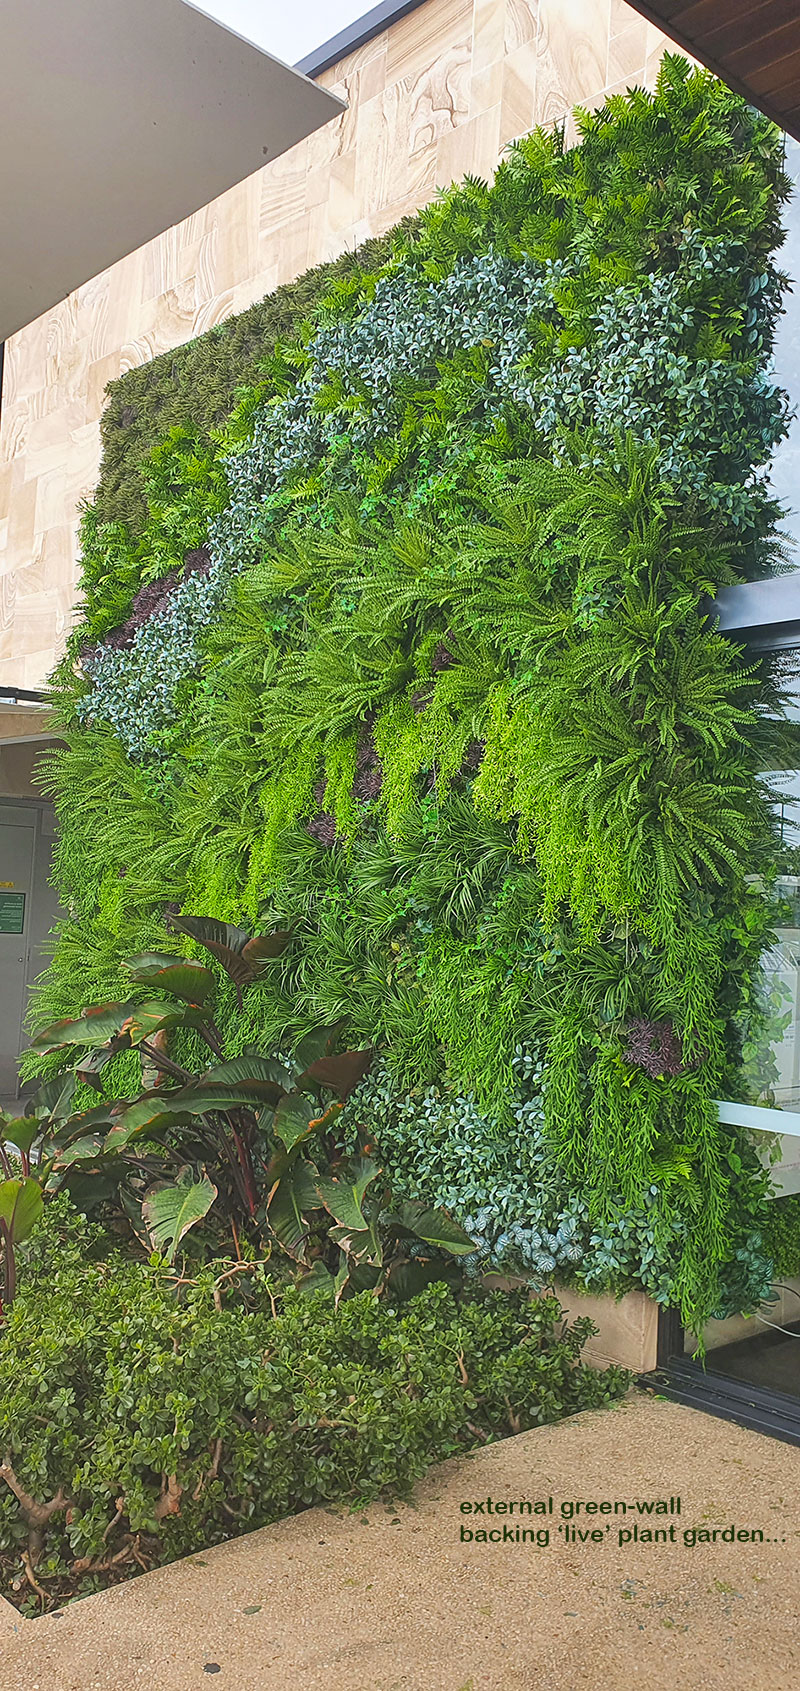 external green-wall with latest uv-rated greenery